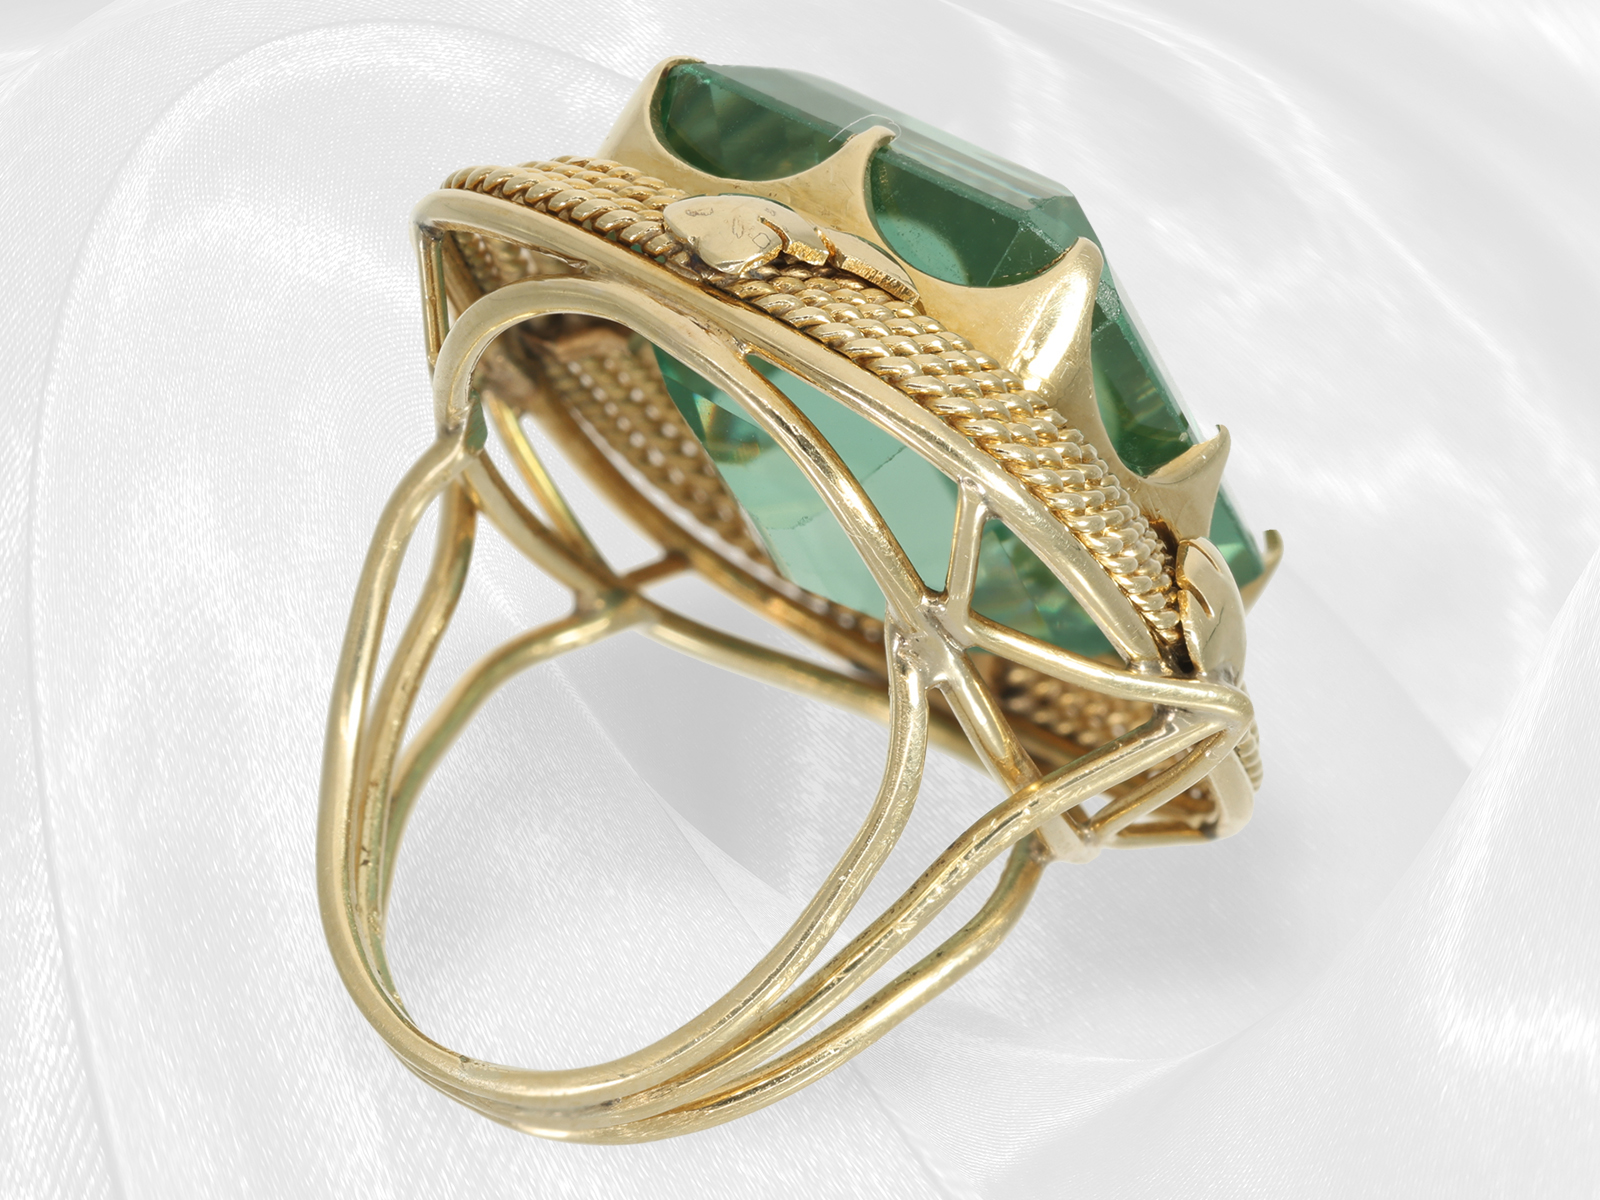 Ring: extraordinary vintage goldsmith ring with green gemstone, old 14K gold handwork - Image 5 of 5